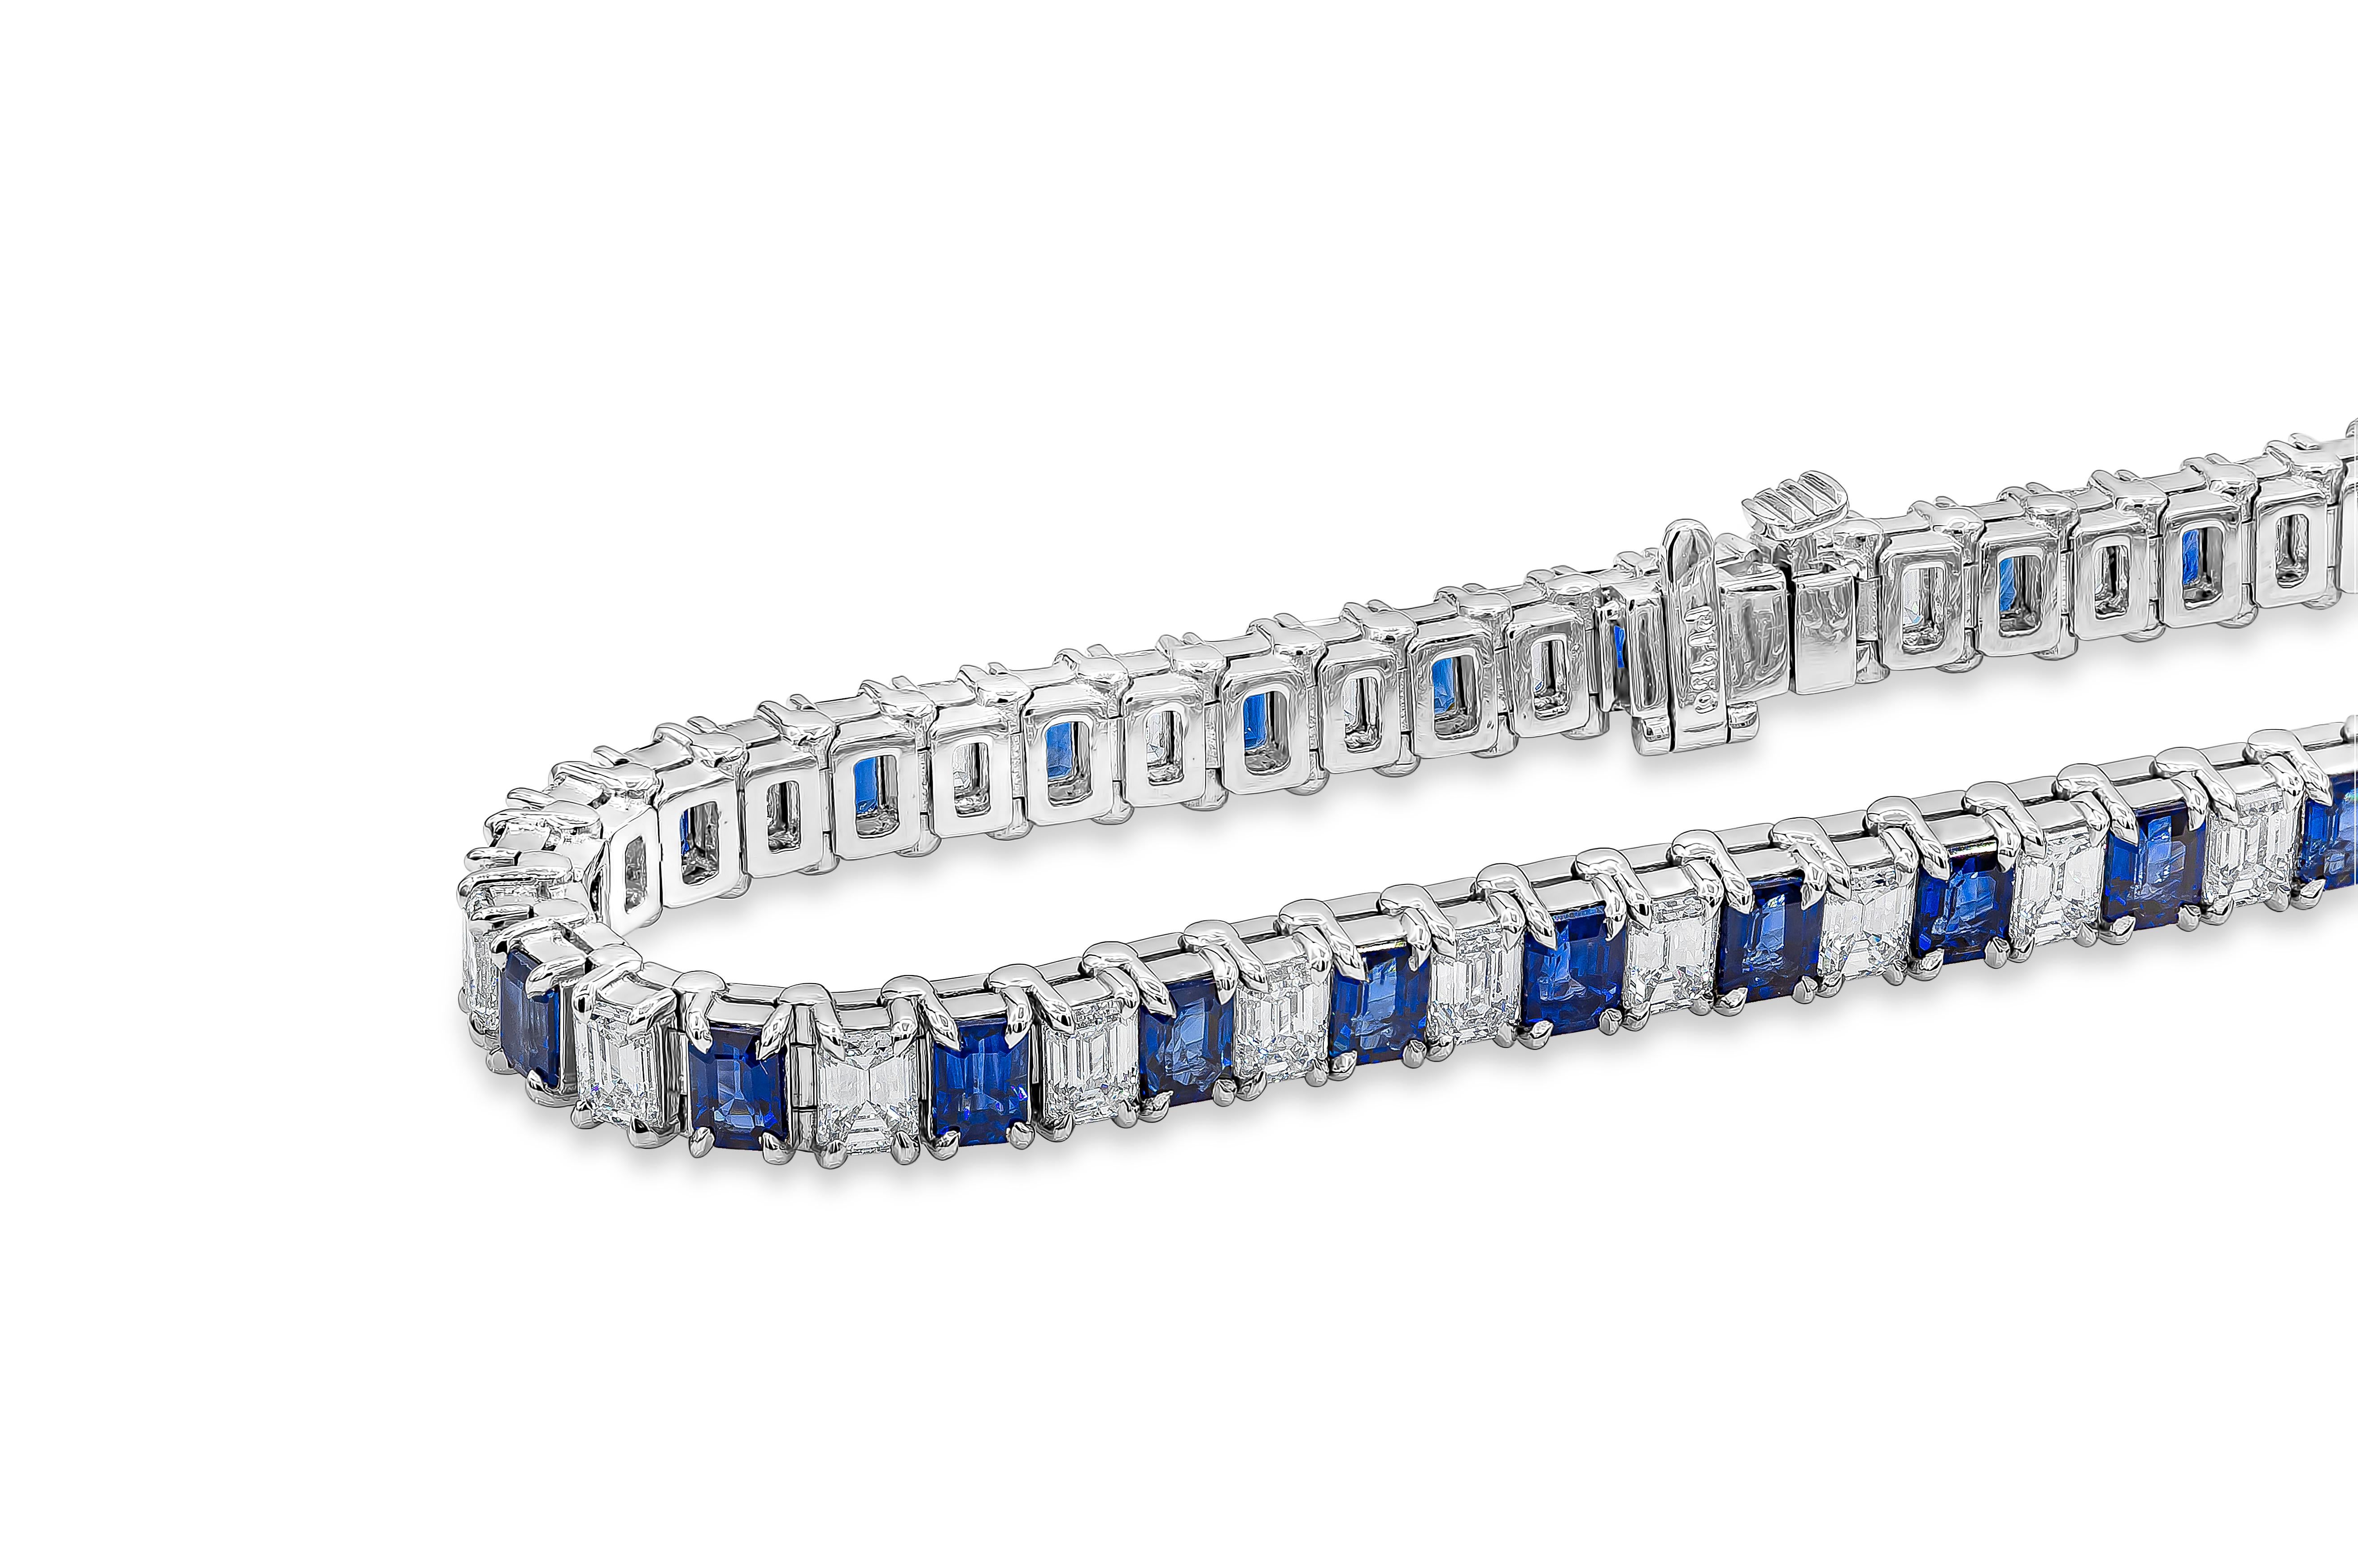 A fashionable tennis bracelet showcasing alternating emerald cut royal blue sapphires and emerald cut diamonds. Sapphires weighing 7.00 carats total, VS in Clarity. Diamonds weighing 5.73 carats total, H Color and VS in Clarity. Set in a classic